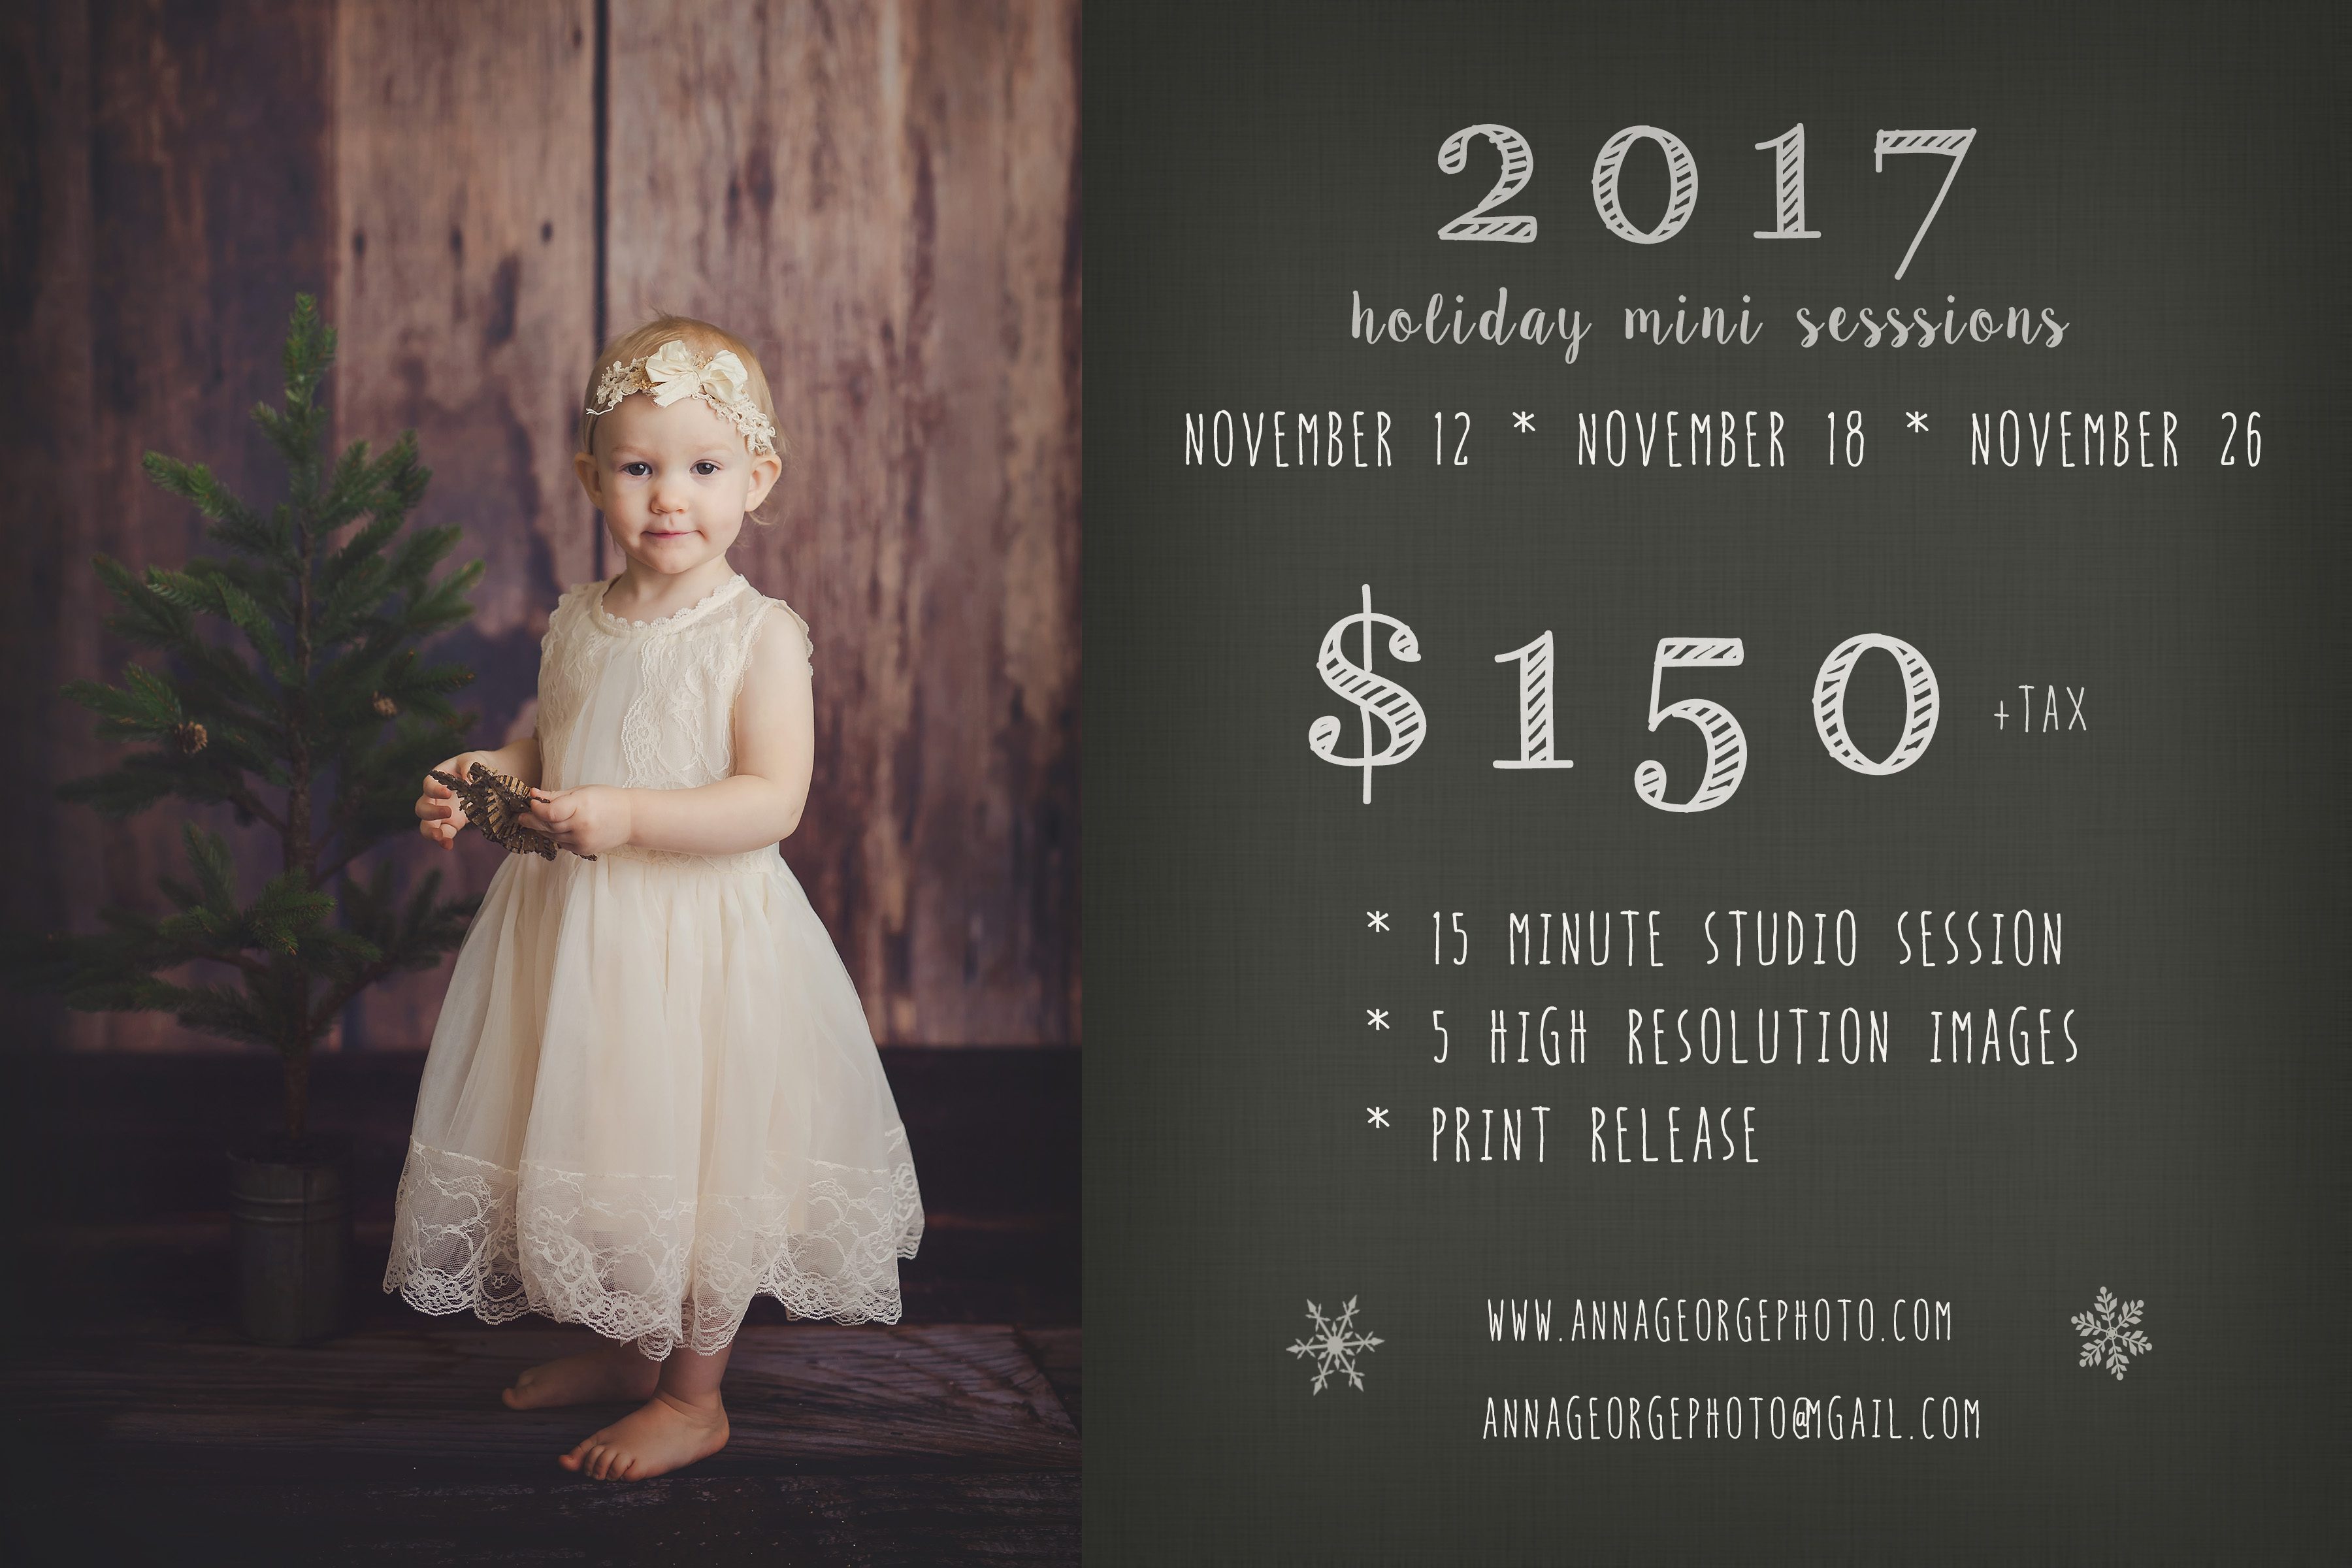 www.annageorgephoto.com 2017 christmas and holiday mini photo sessions